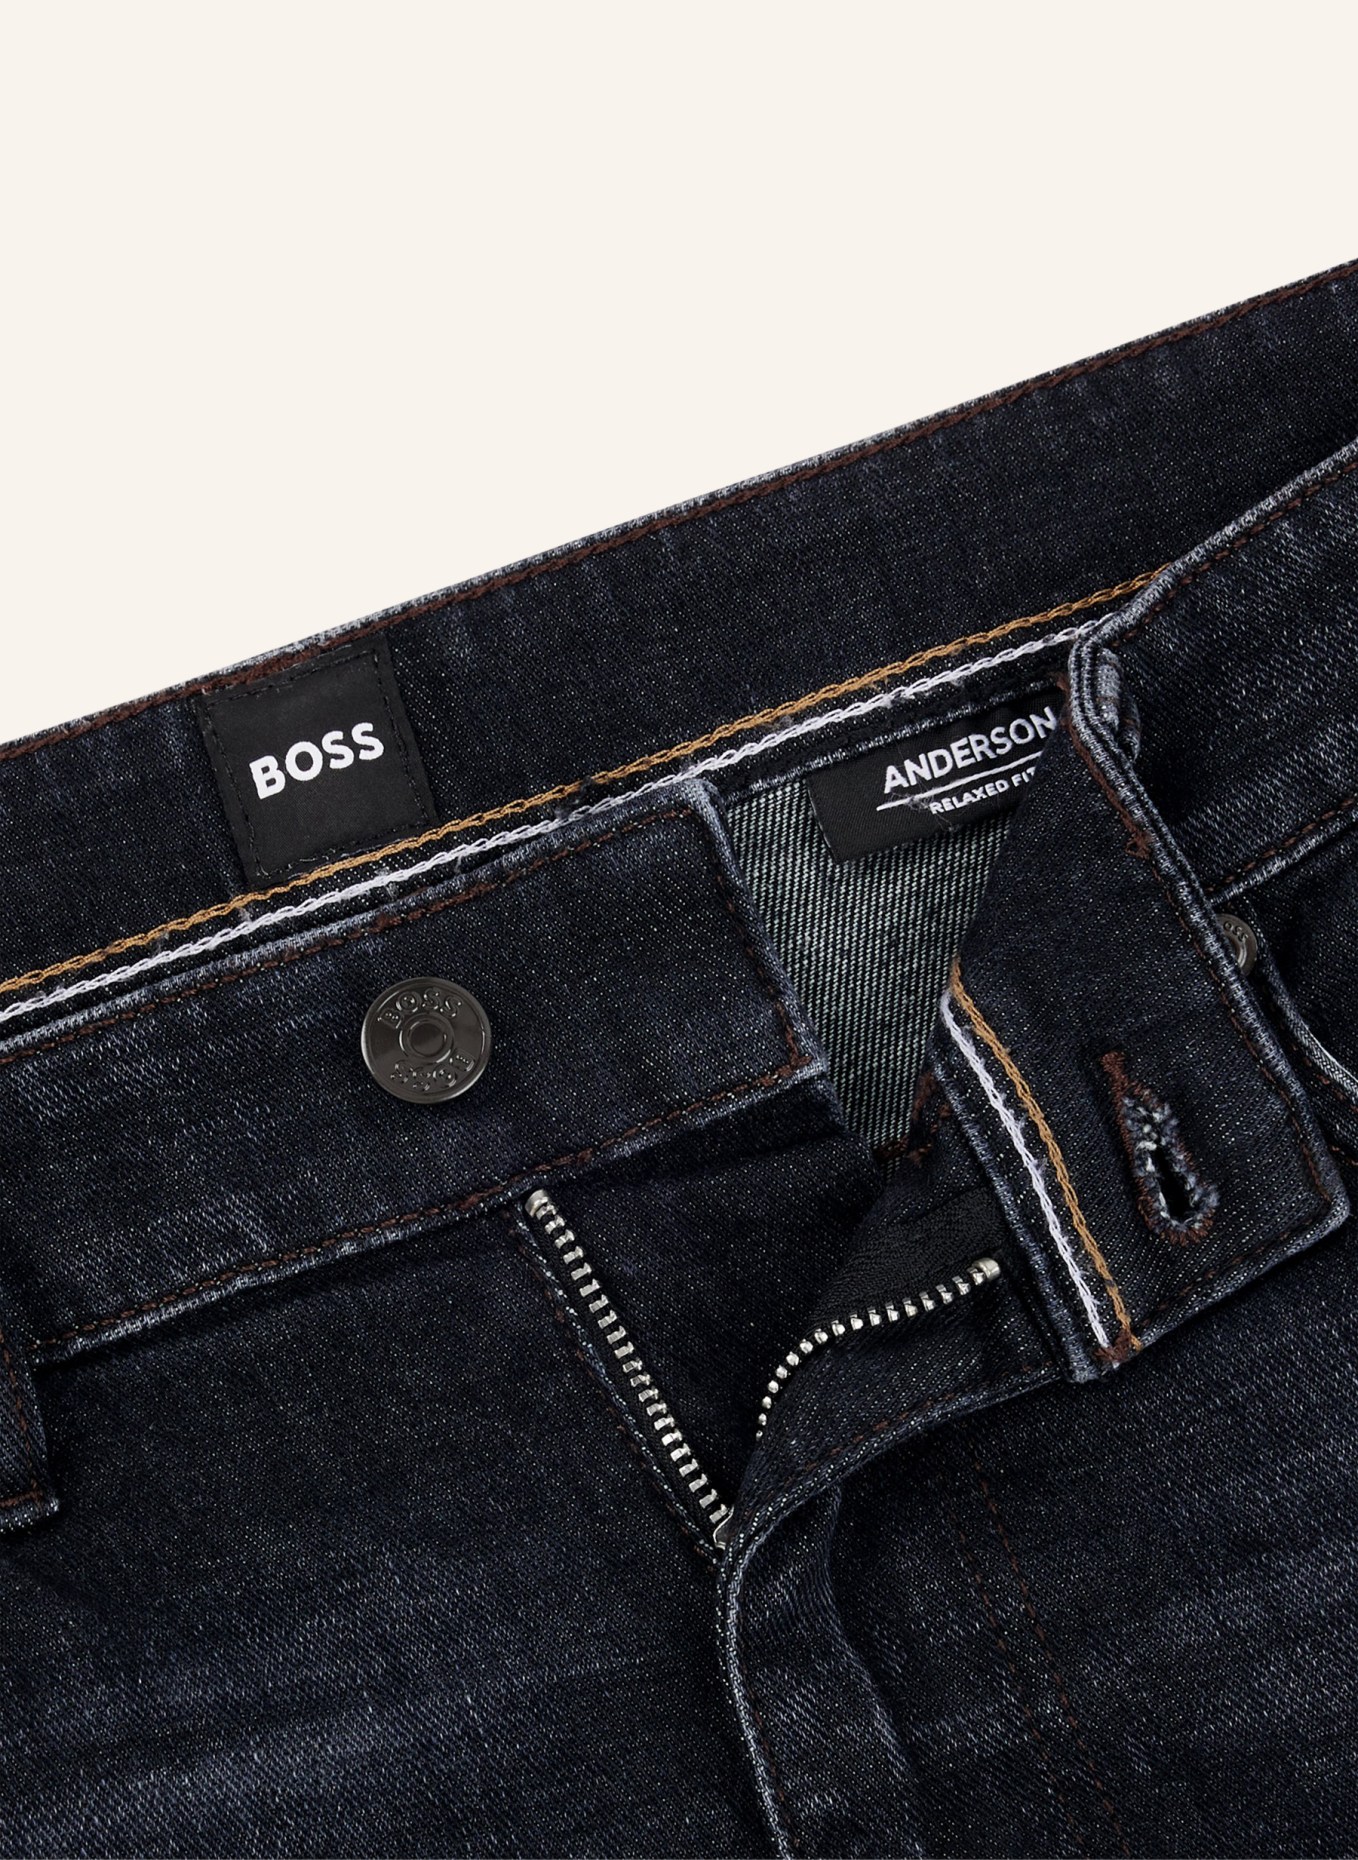 BOSS Jeans ANDERSON Relaxed Fit, Farbe: SCHWARZ (Bild 2)